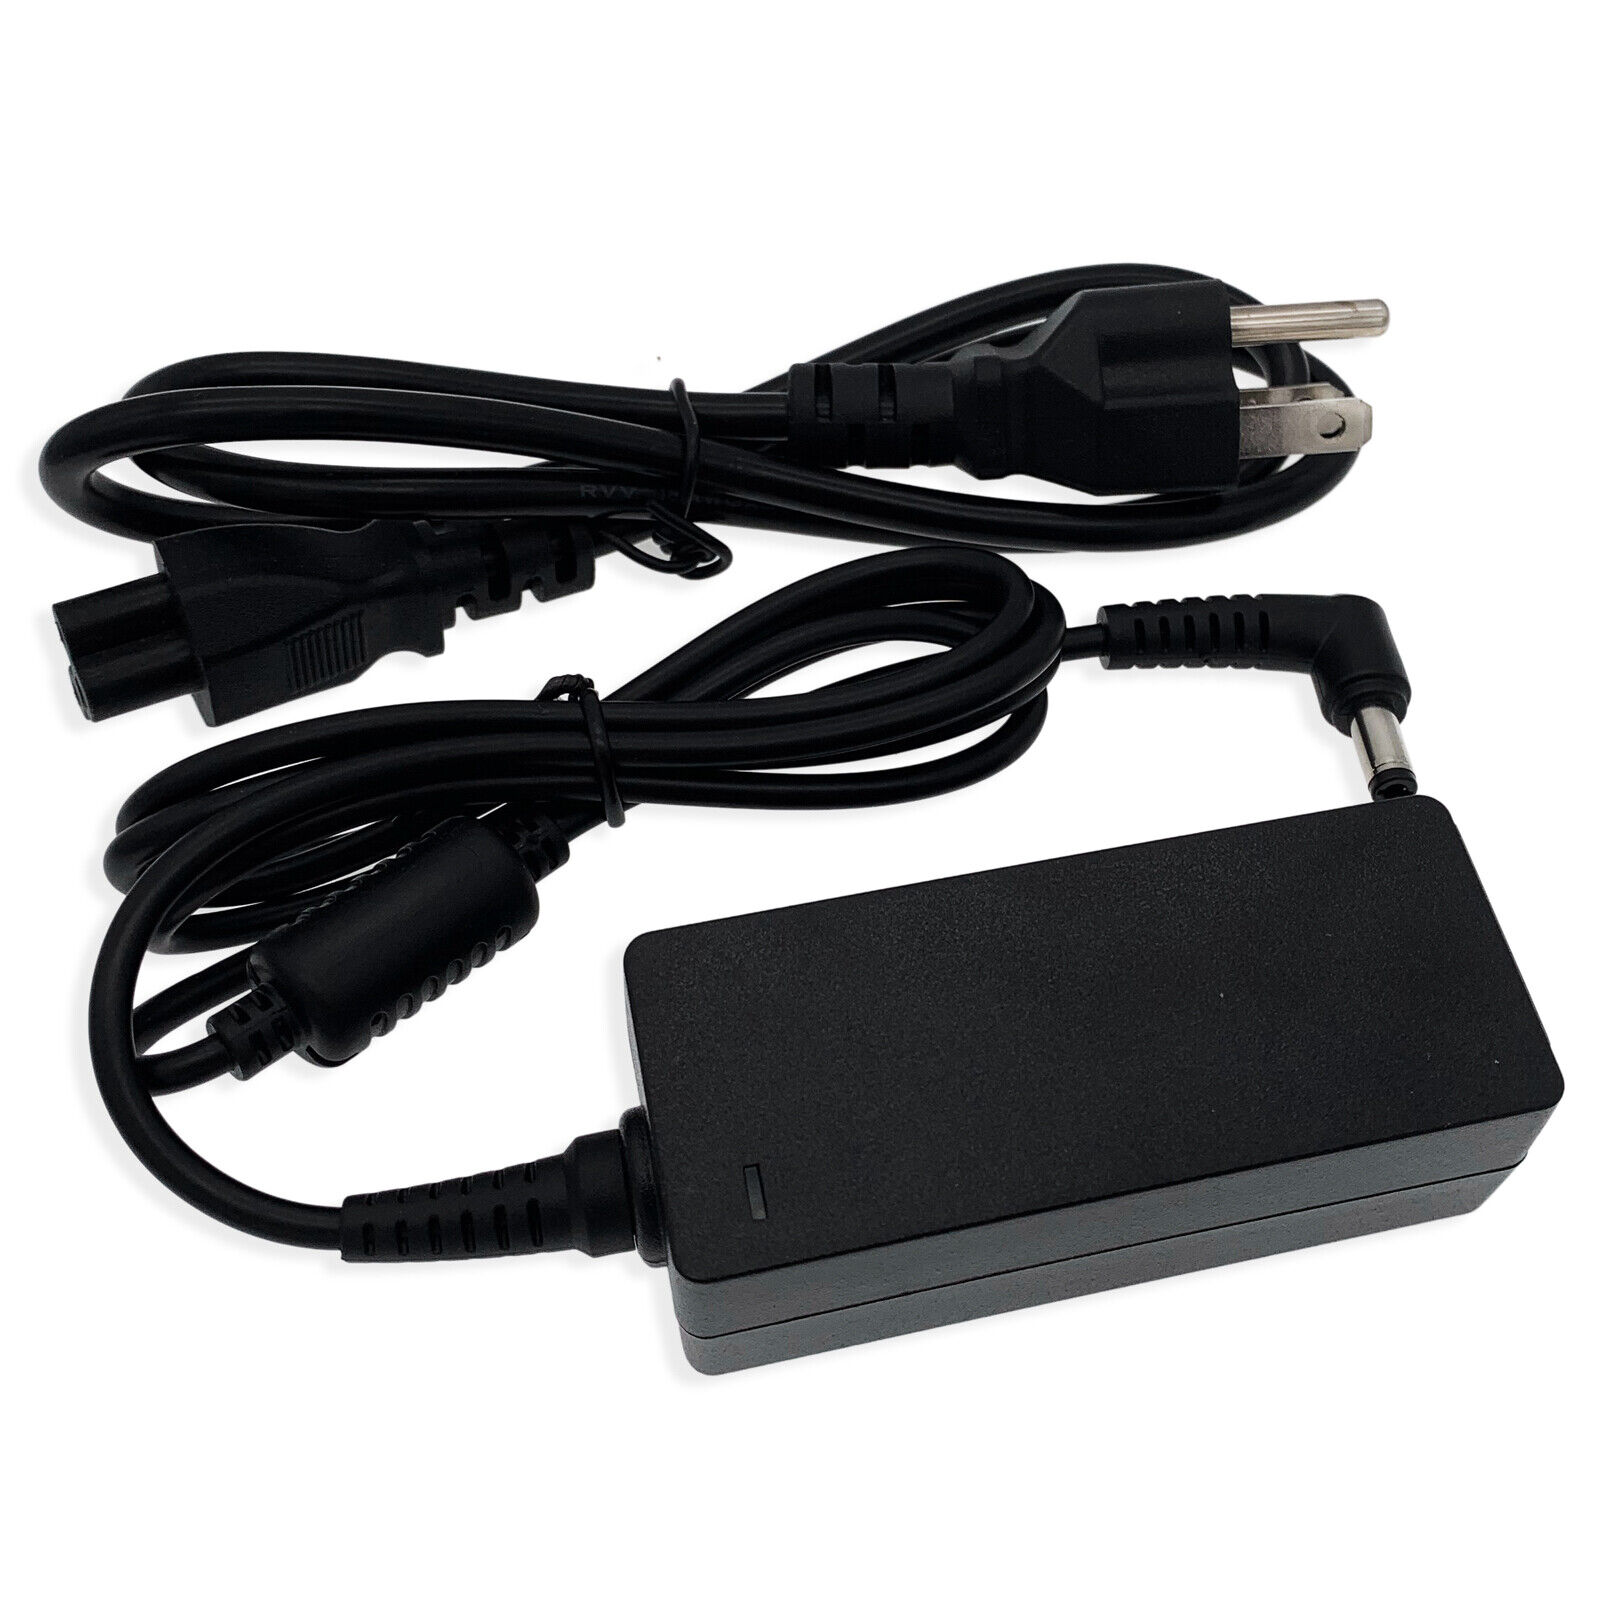 AC Adapter Charger AD2088320 010LF for ImagineBook MJ401TA 14" Laptop 45W AC Adapter Charger AD2088320 010LF for Imagin